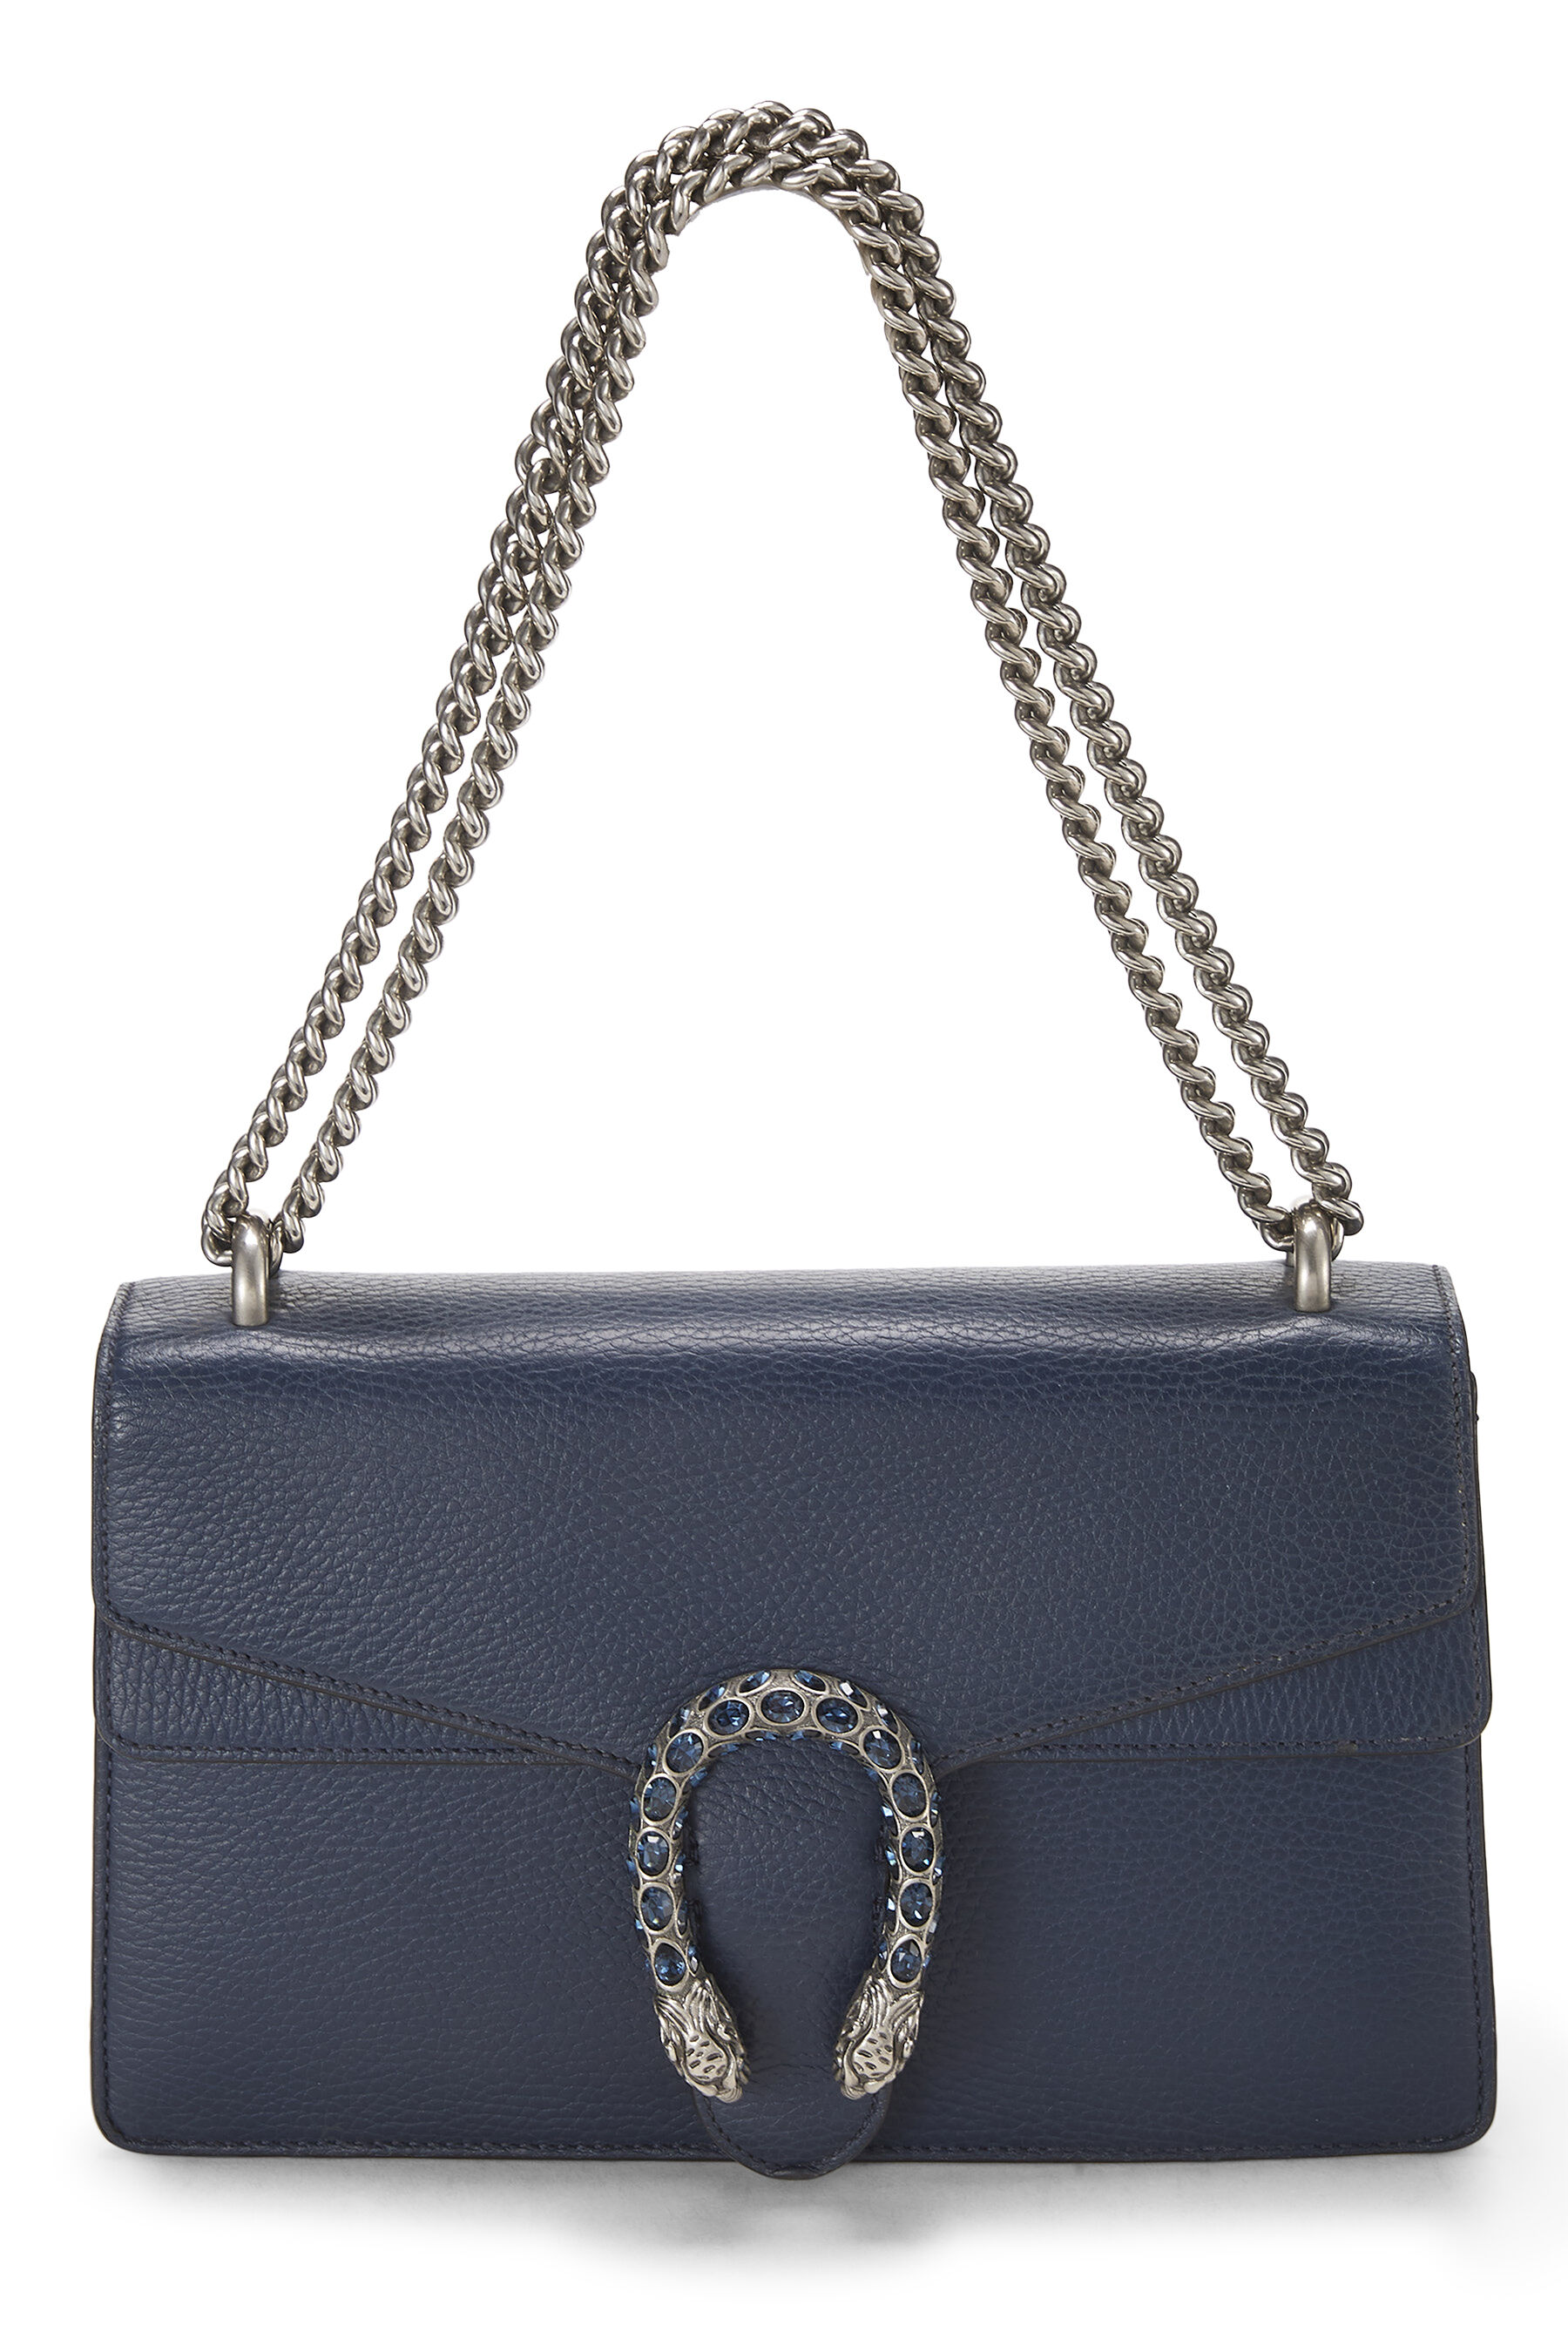 Gucci Navy Leather Dionysus Shoulder Bag Small